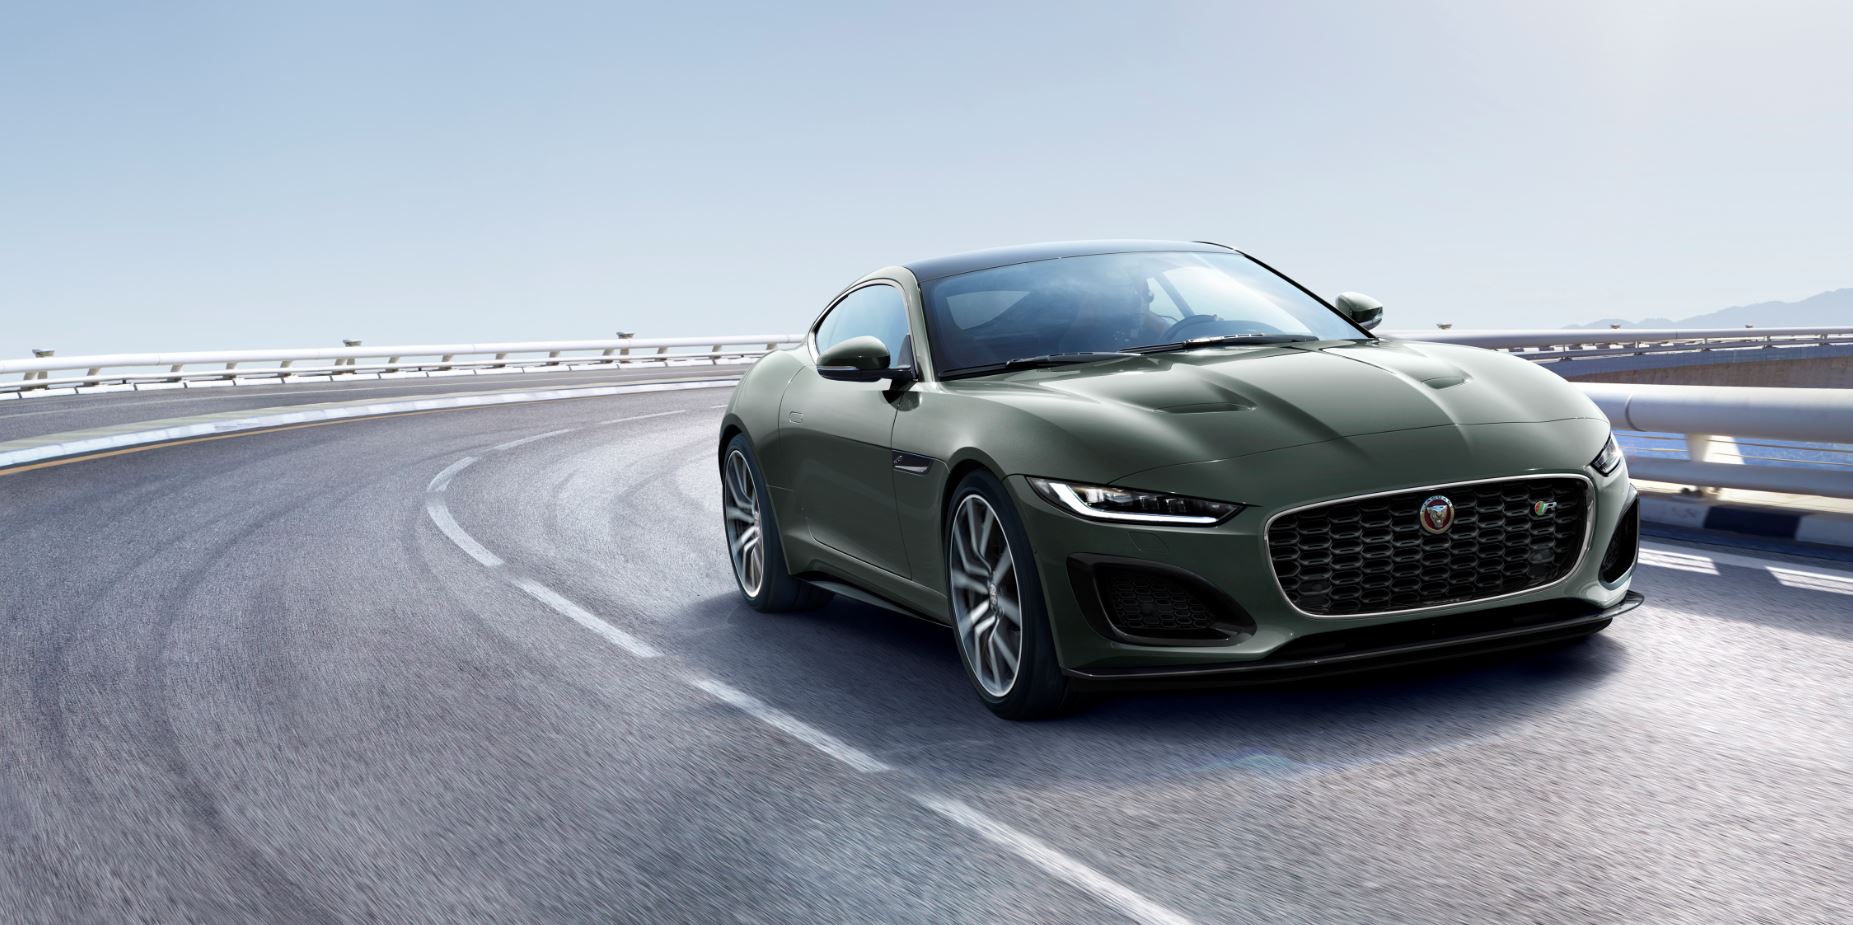 2021 Jaguar F-Type Heritage 60 Edition Coupe & Convertible